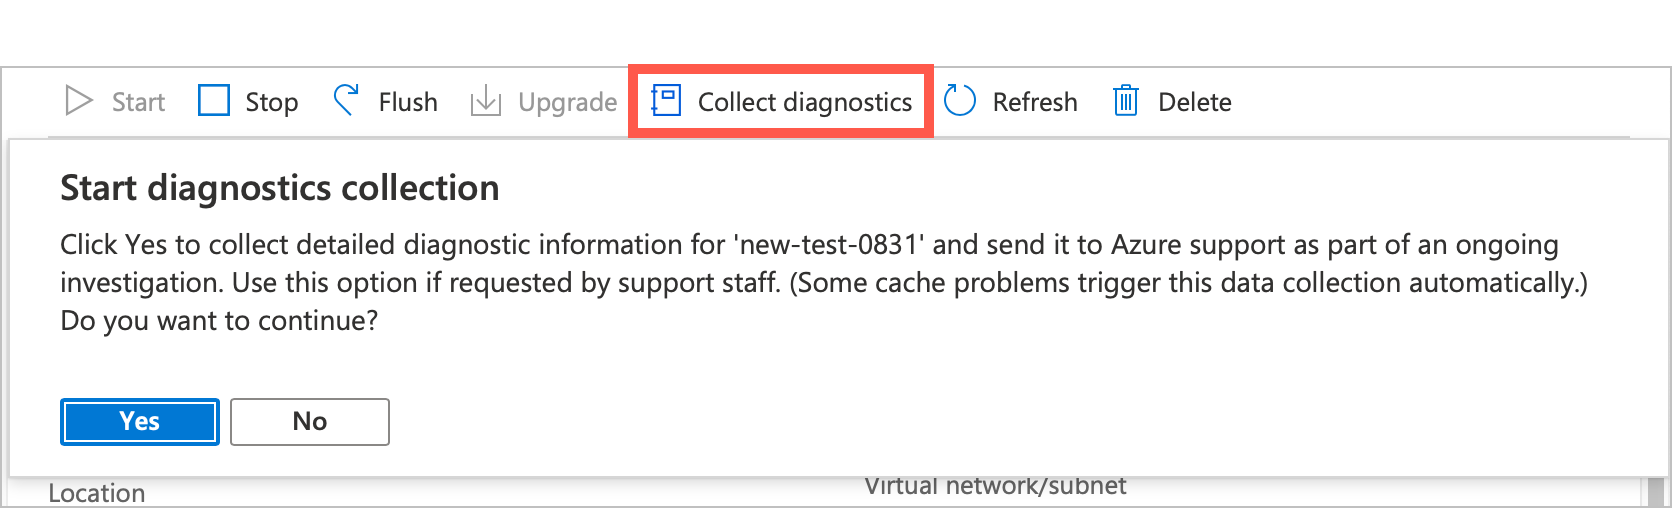 screenshot of the 'Start diagnostics collection' pop-up confirmation message. The default button 'yes' is highlighted.